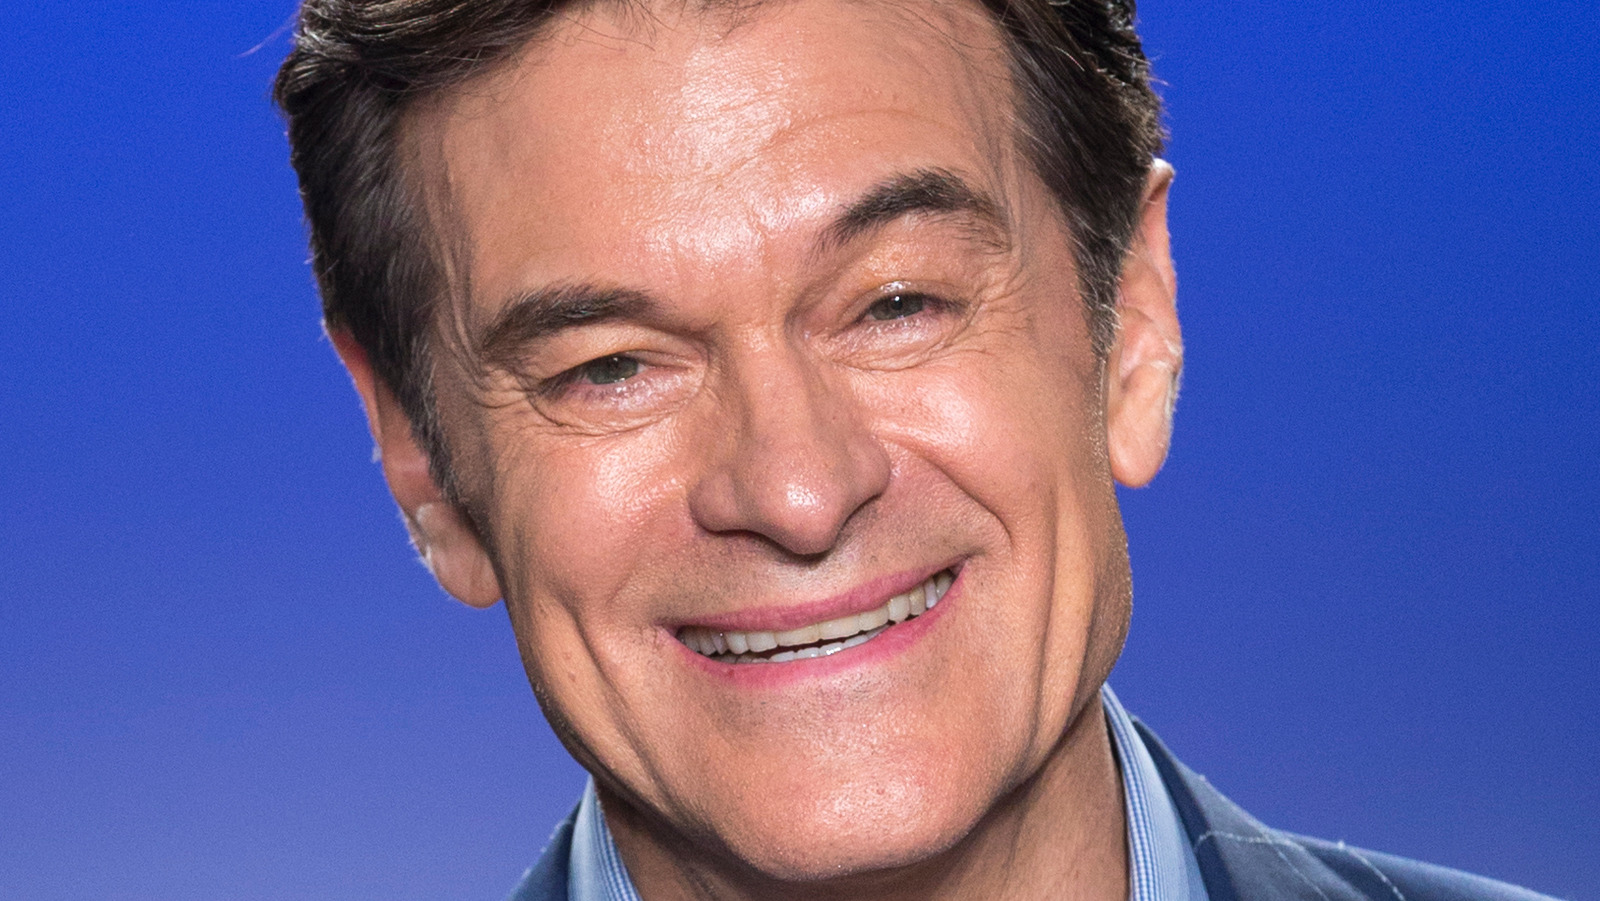 Dr. Oz's Bold New Look: Blue Hair - wide 6